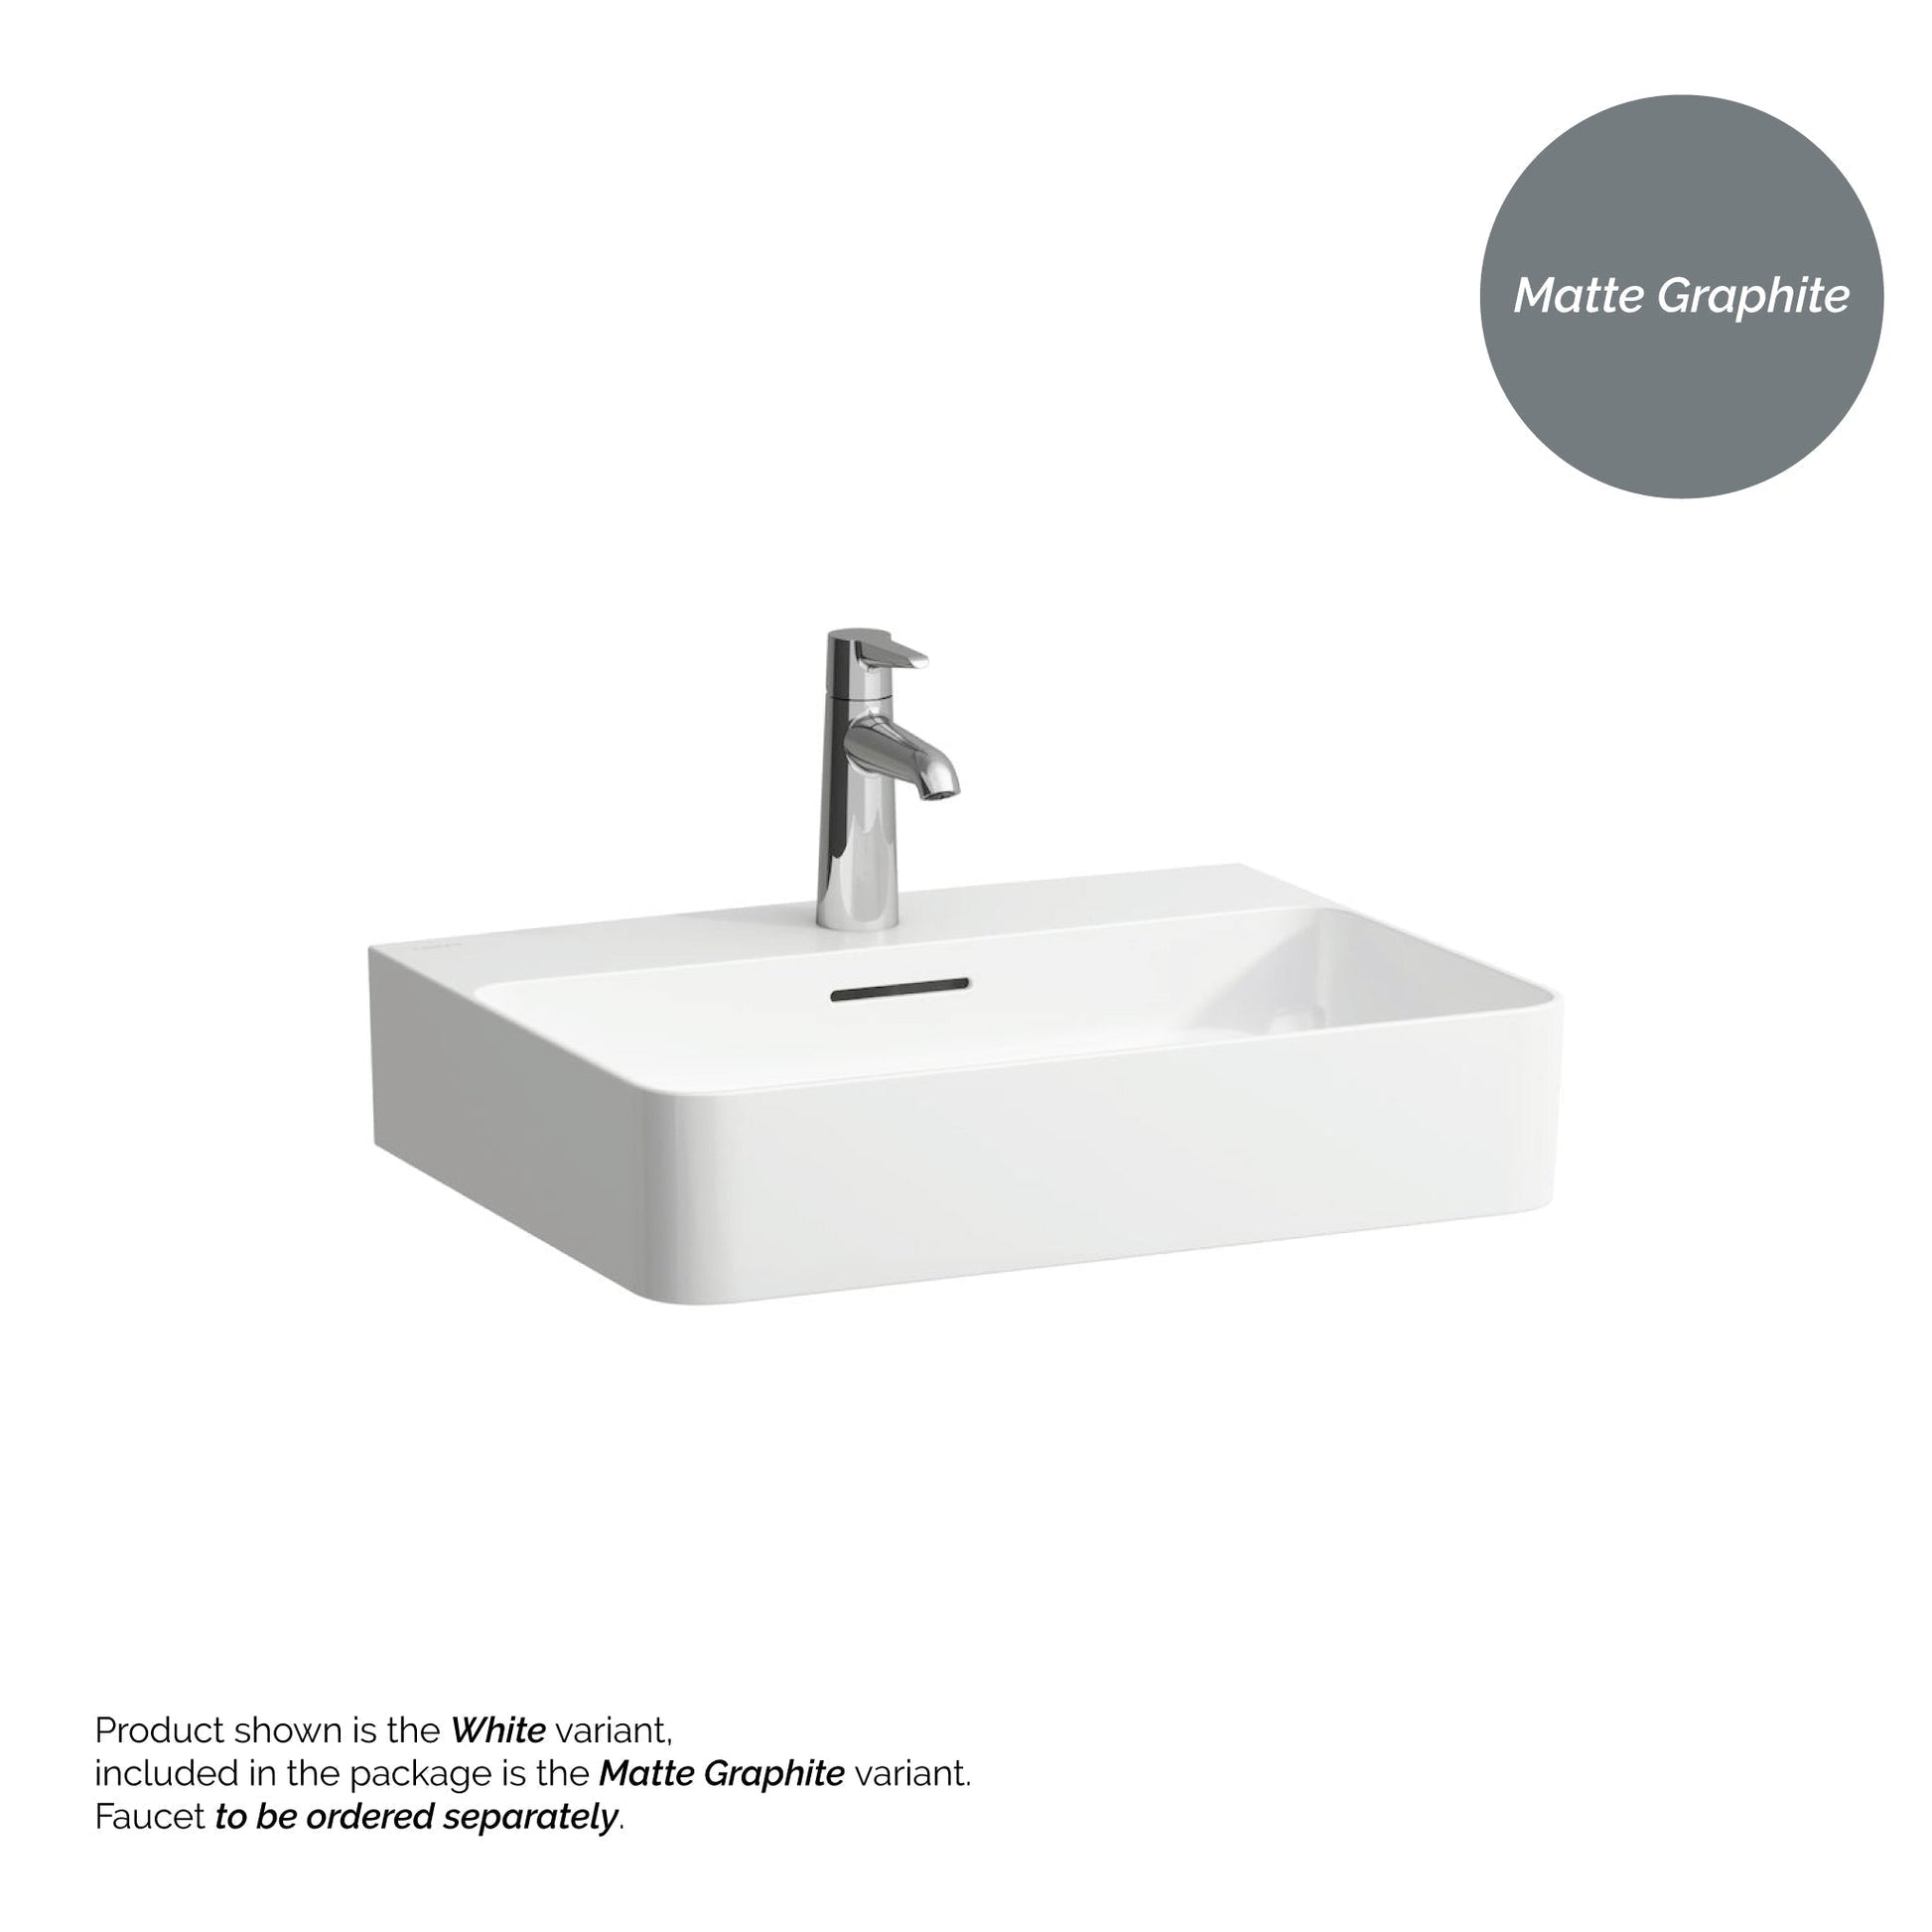 Laufen Val 22" x 17" Matte Graphite Ceramic Wall-Mounted Bathroom Sink With Faucet Hole